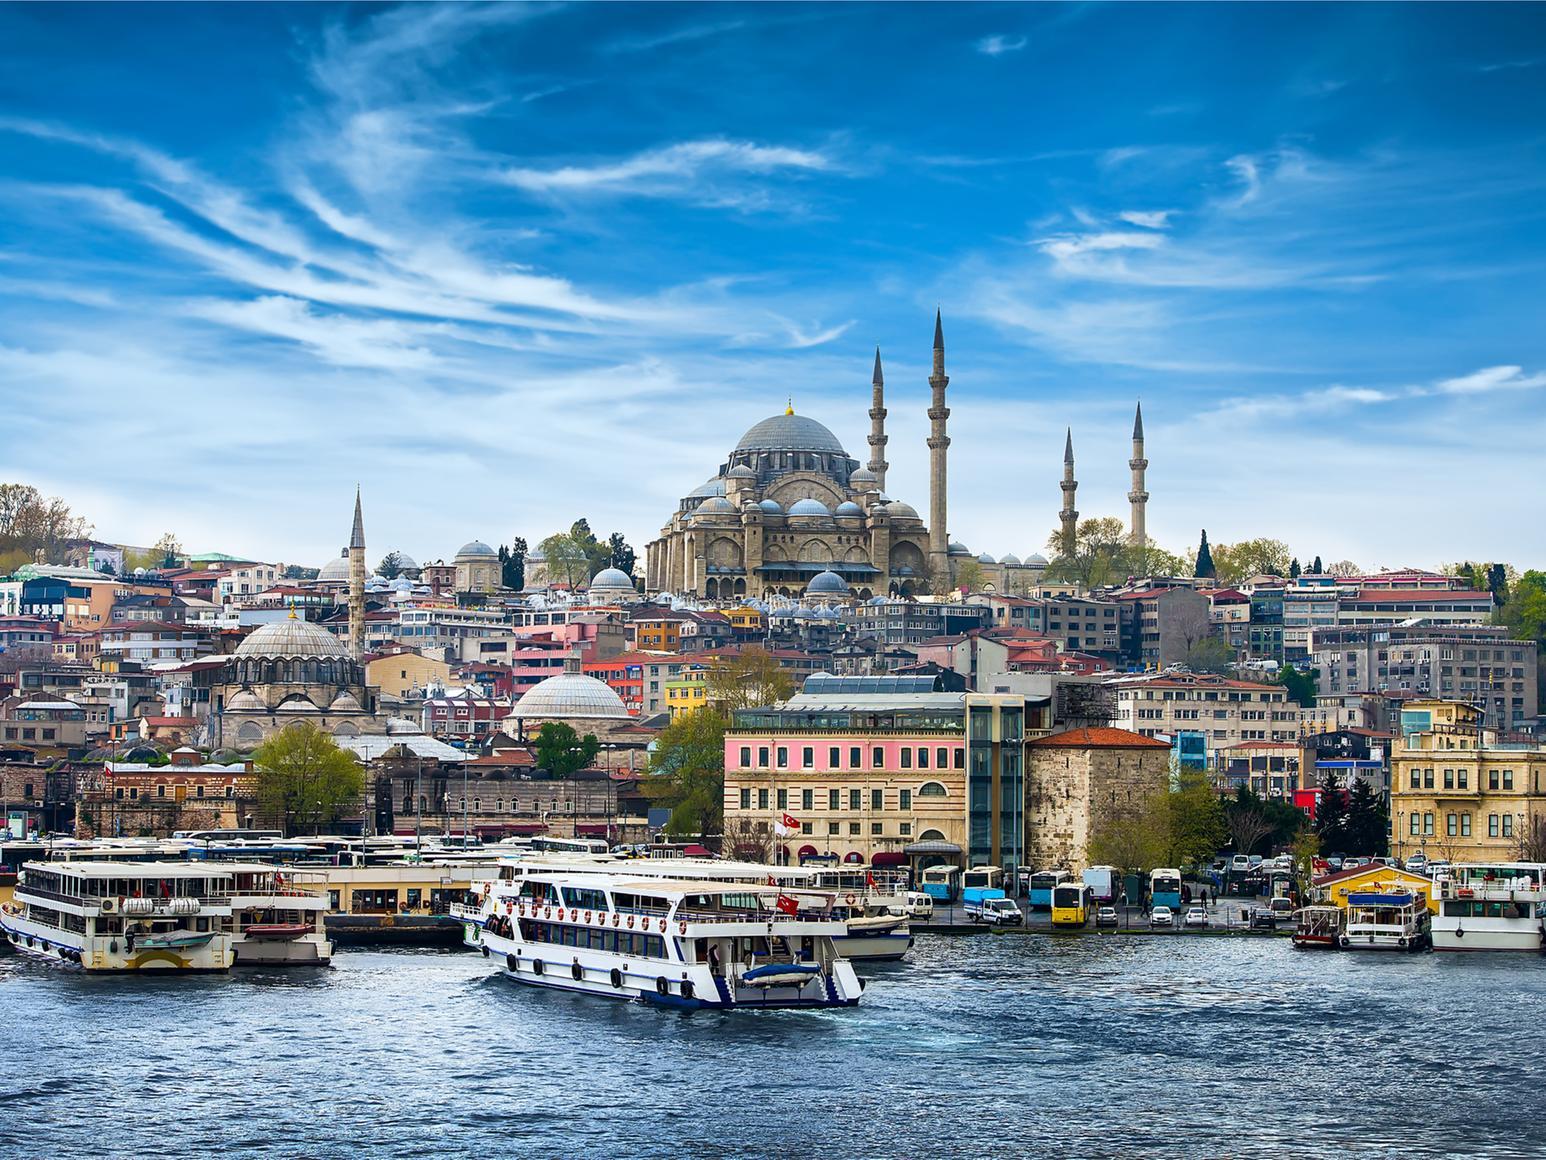 With beautiful scenery and a rich history, Turkey could be a great place to explore over the Easter break. Again, temperatures can vary depending on location, but average daily temperature can range from 16C to 21C.